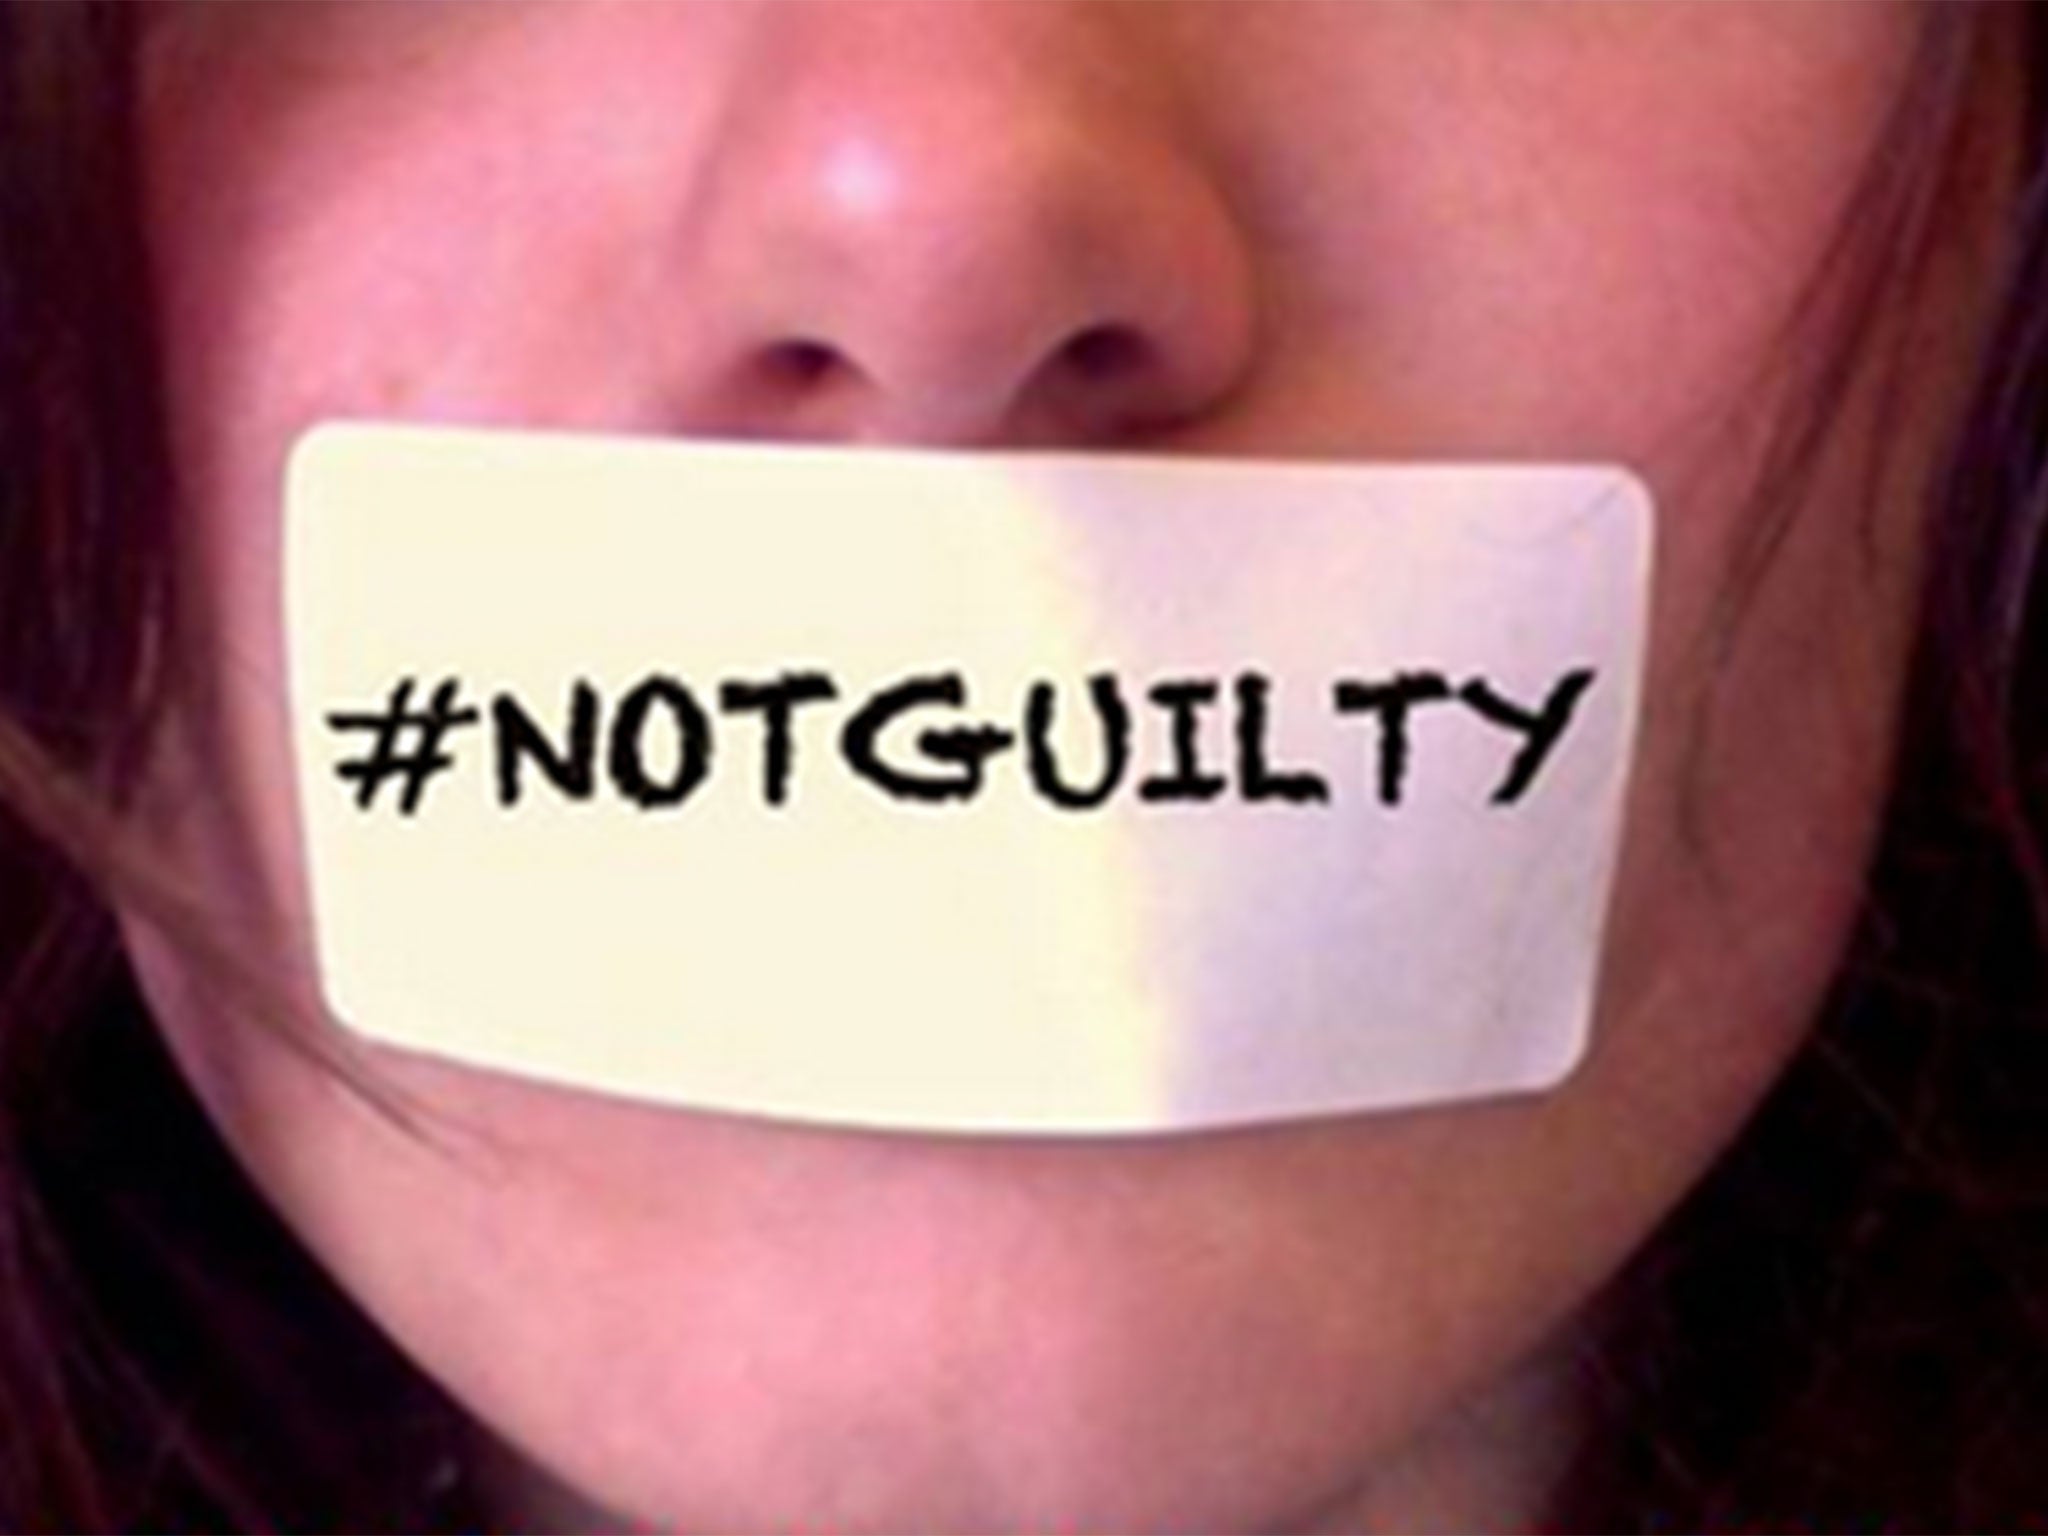 A second Oxford student has shared the harrowing account of her attack and rape as part of the #NotGuilty campaign